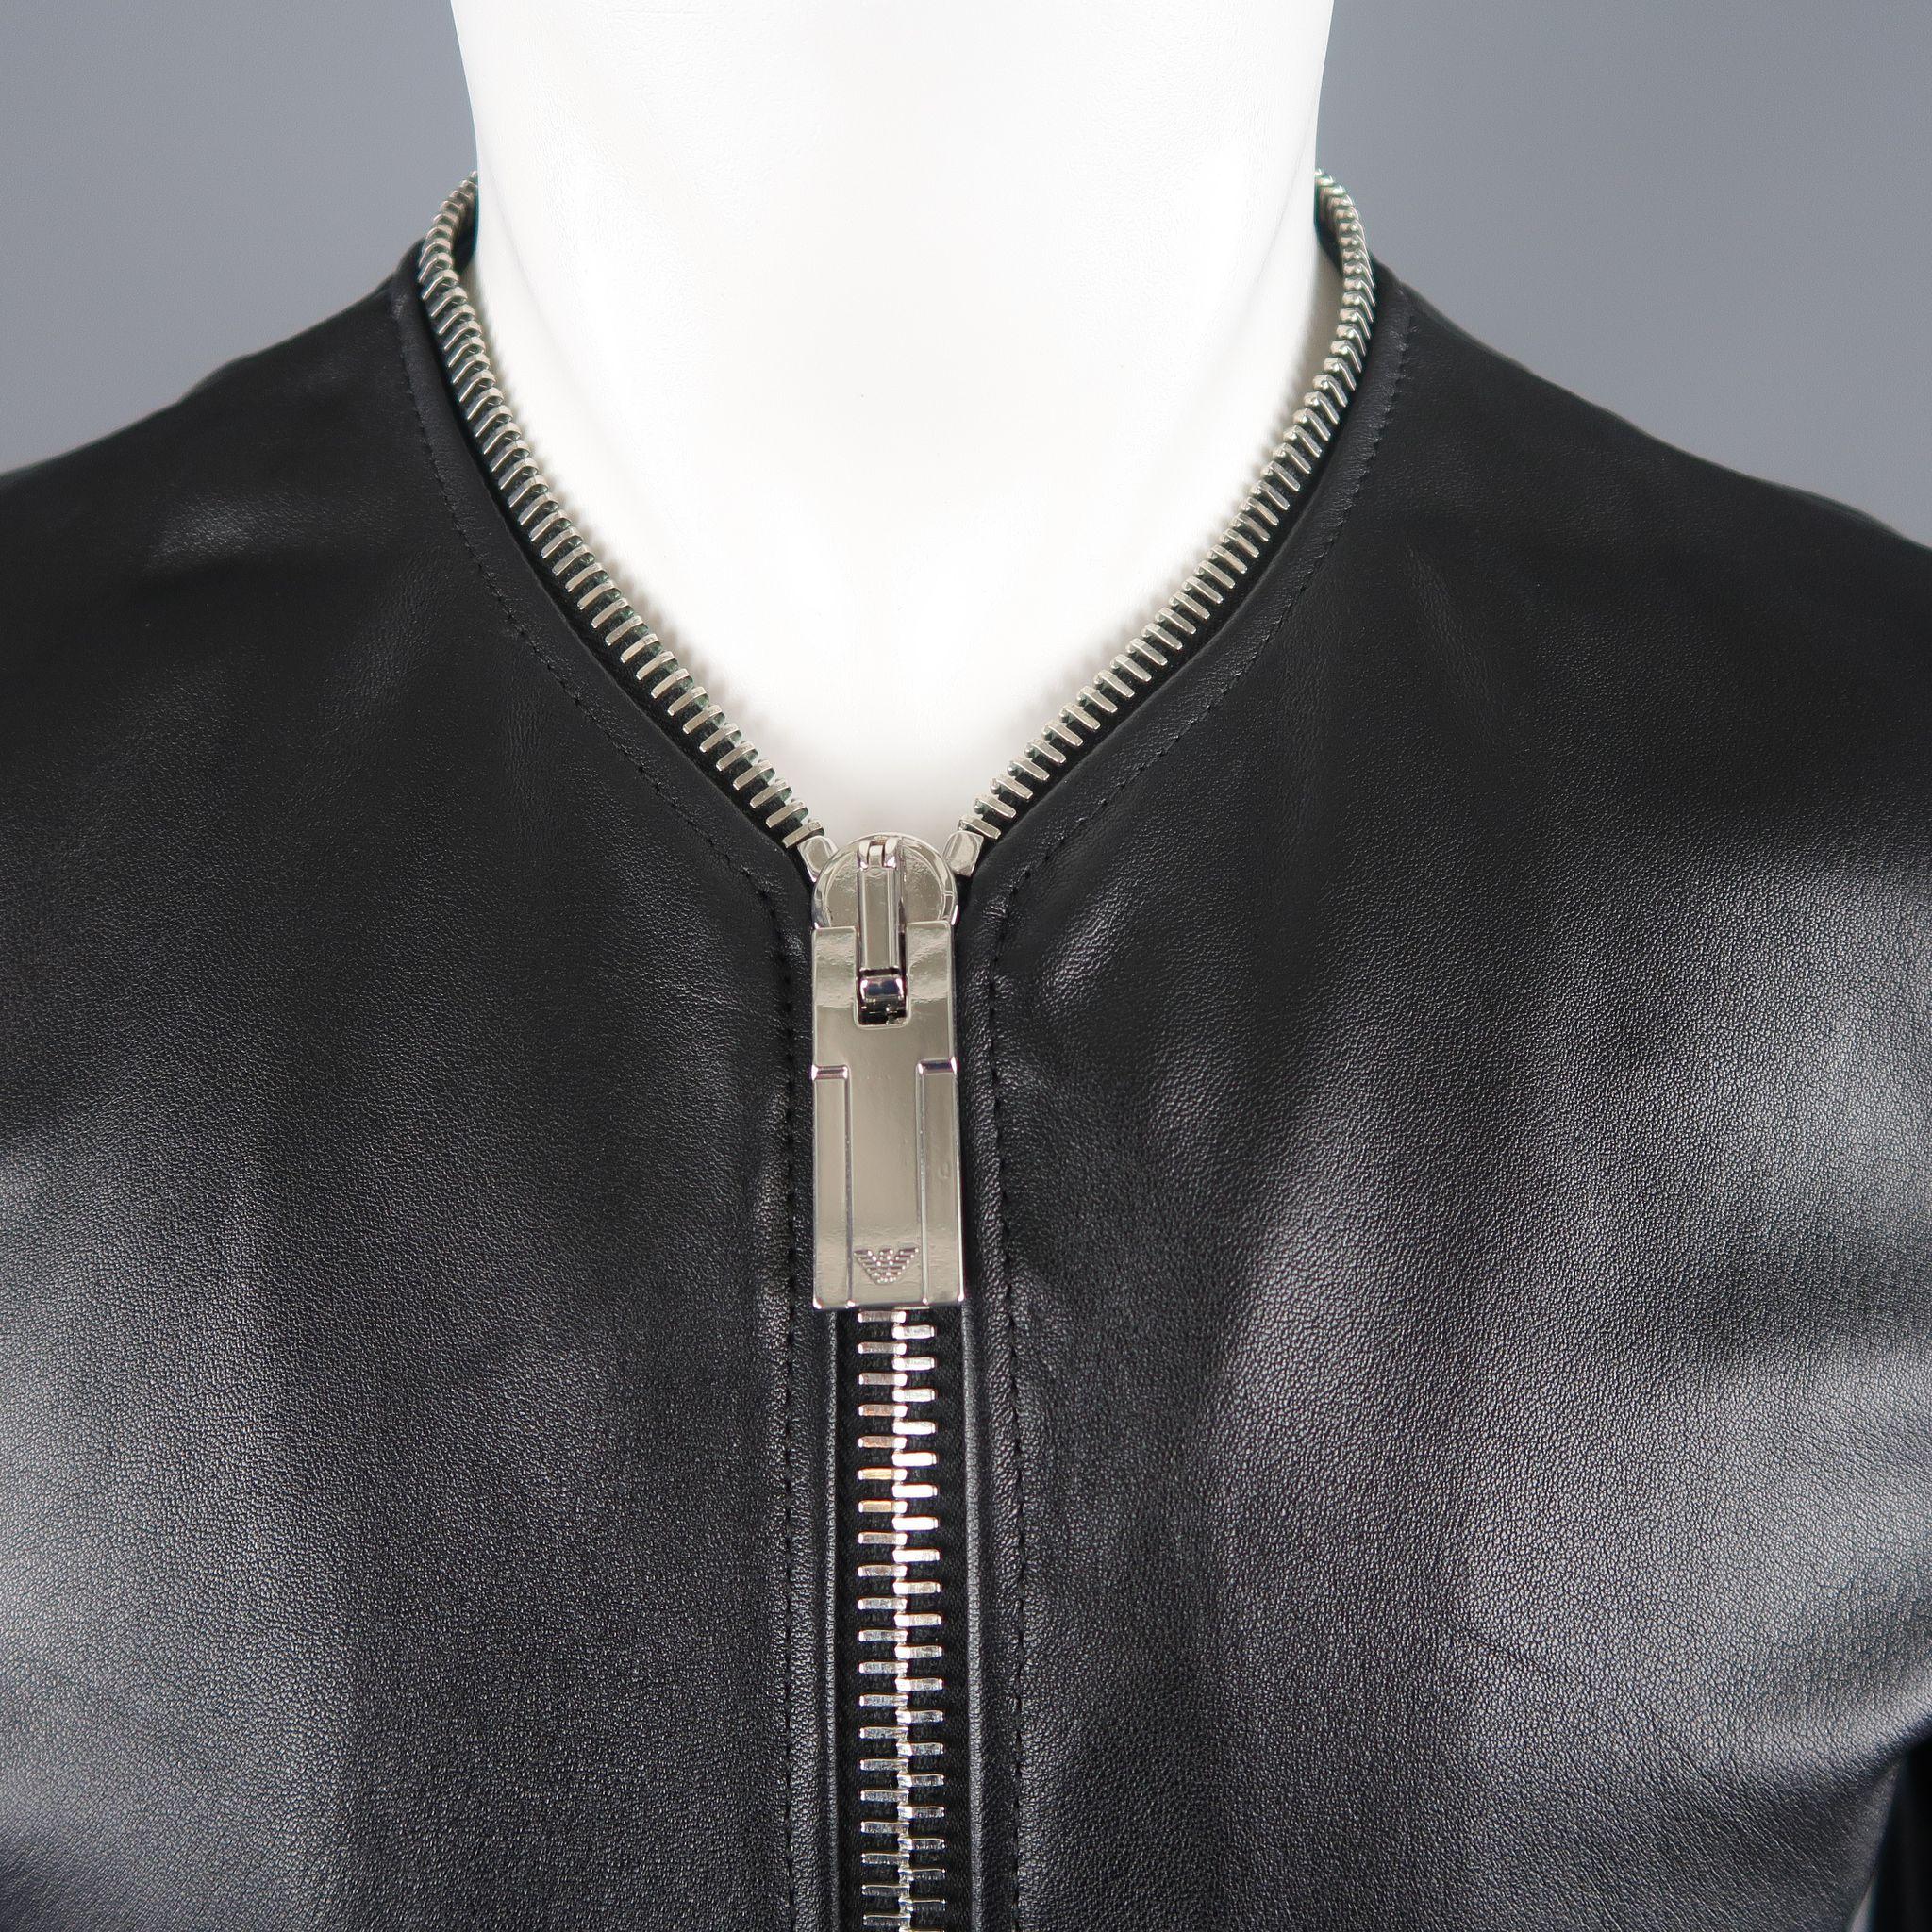 EMPORIO ARMANI jacket comes in black lambskin leather with a collarless V neckline, oversized double zip front,  zip cuffs, and zipper silver tone piping. Made in Romania.
 
Excellent Pre-Owned Condition.
Marked: IT 48
 
Measurements:
 
Shoulder: 16